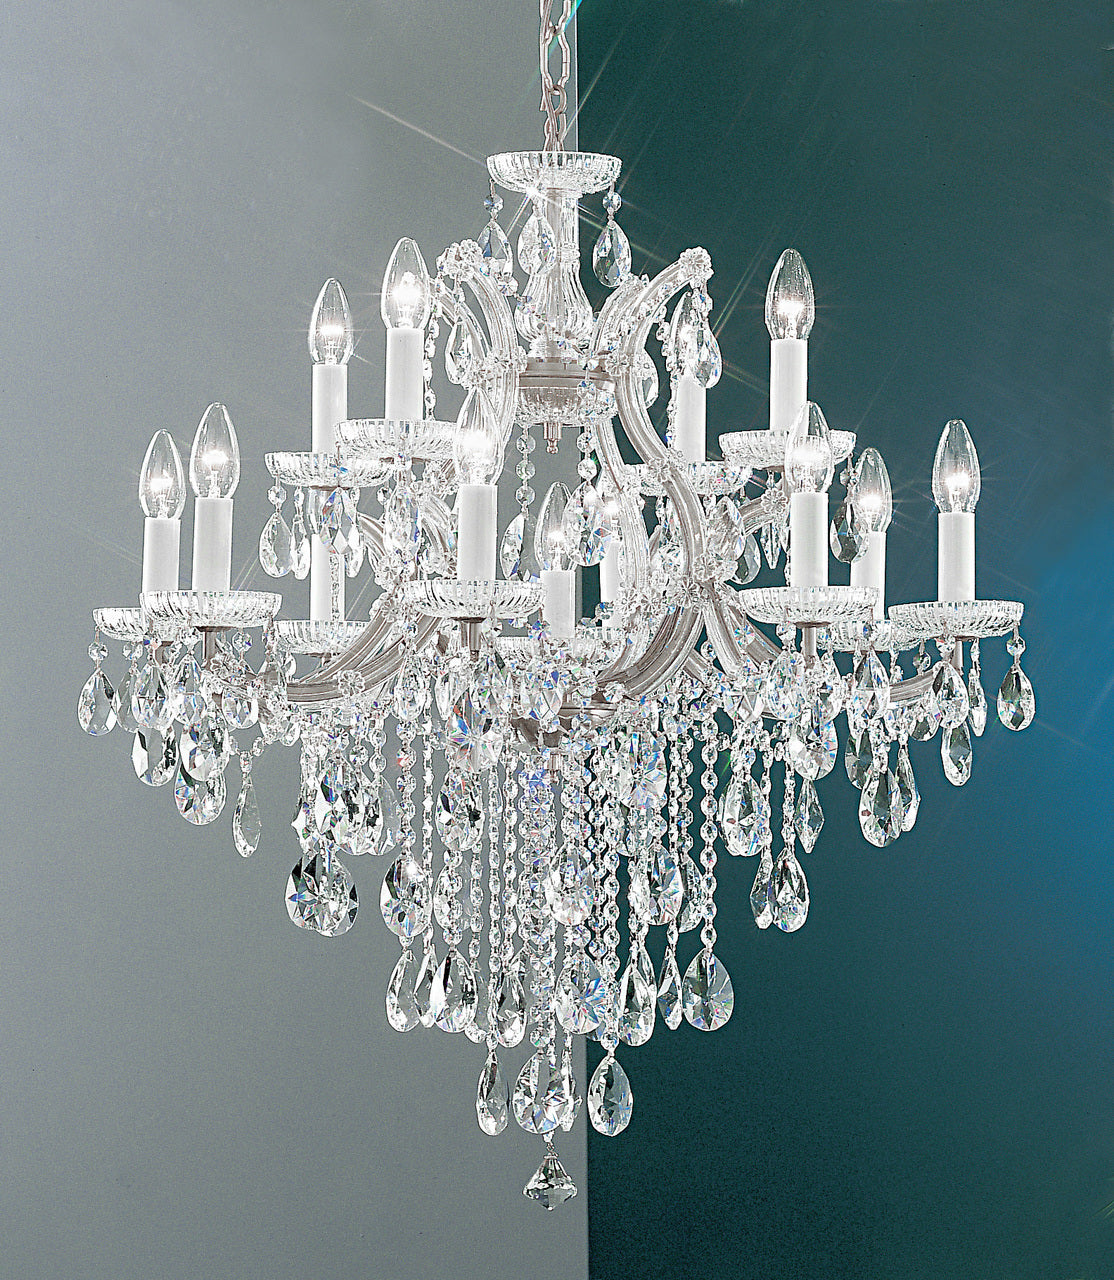 Classic Lighting 8124 CH C Maria Theresa Traditional Crystal Chandelier in Chrome (Imported from Italy)